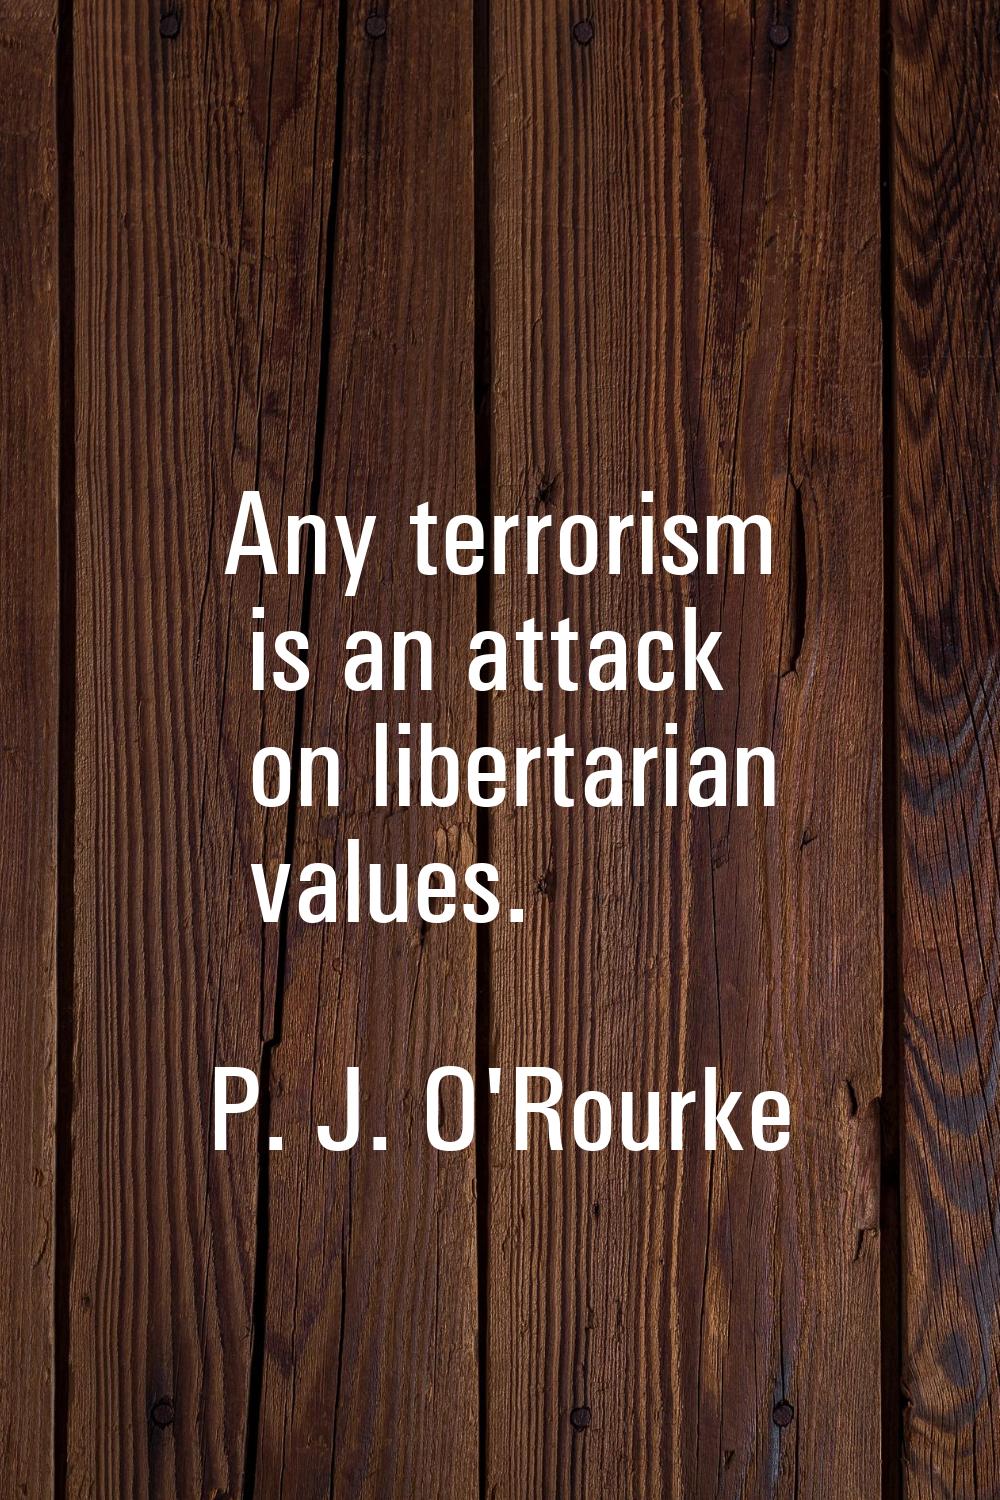 Any terrorism is an attack on libertarian values.